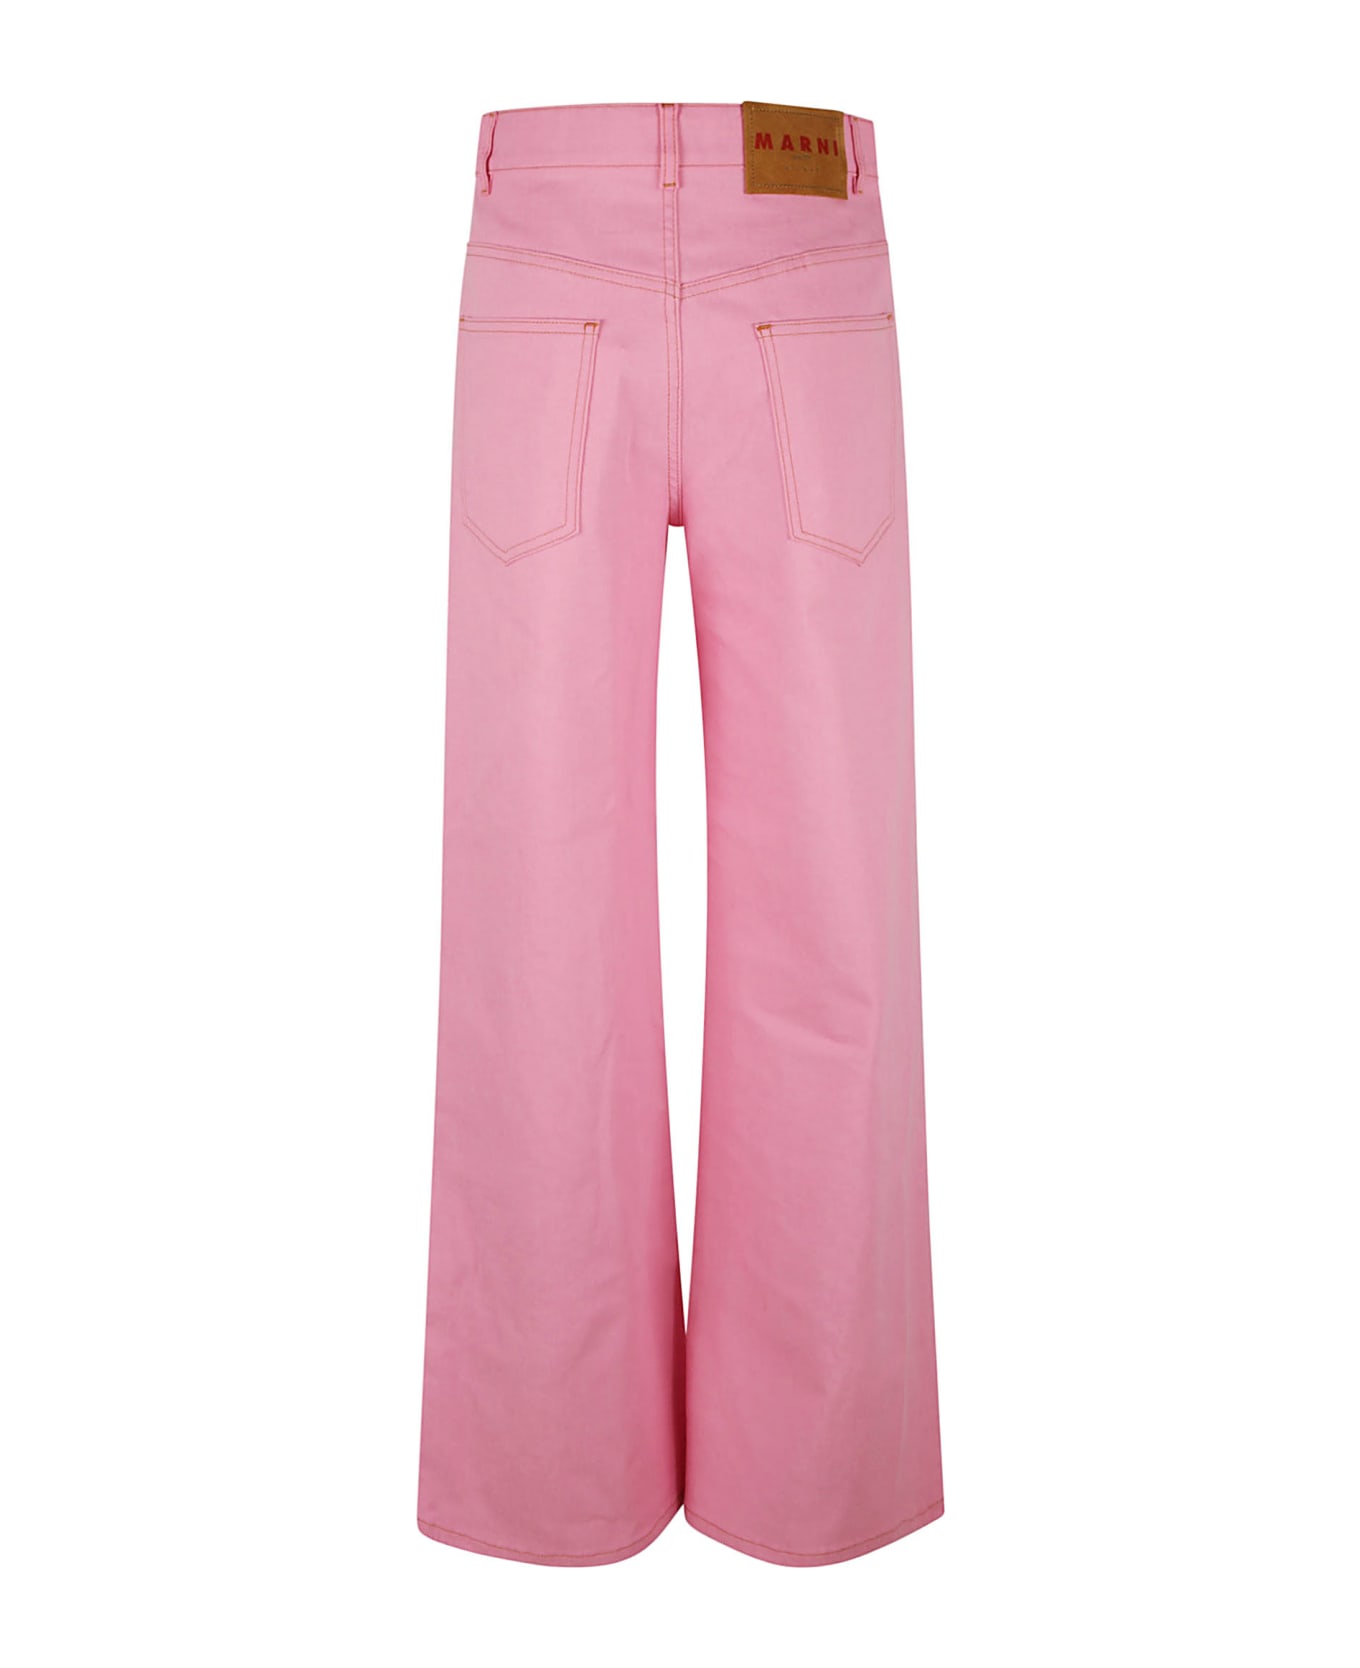 Marni Straight Buttoned Jeans - Pink ボトムス